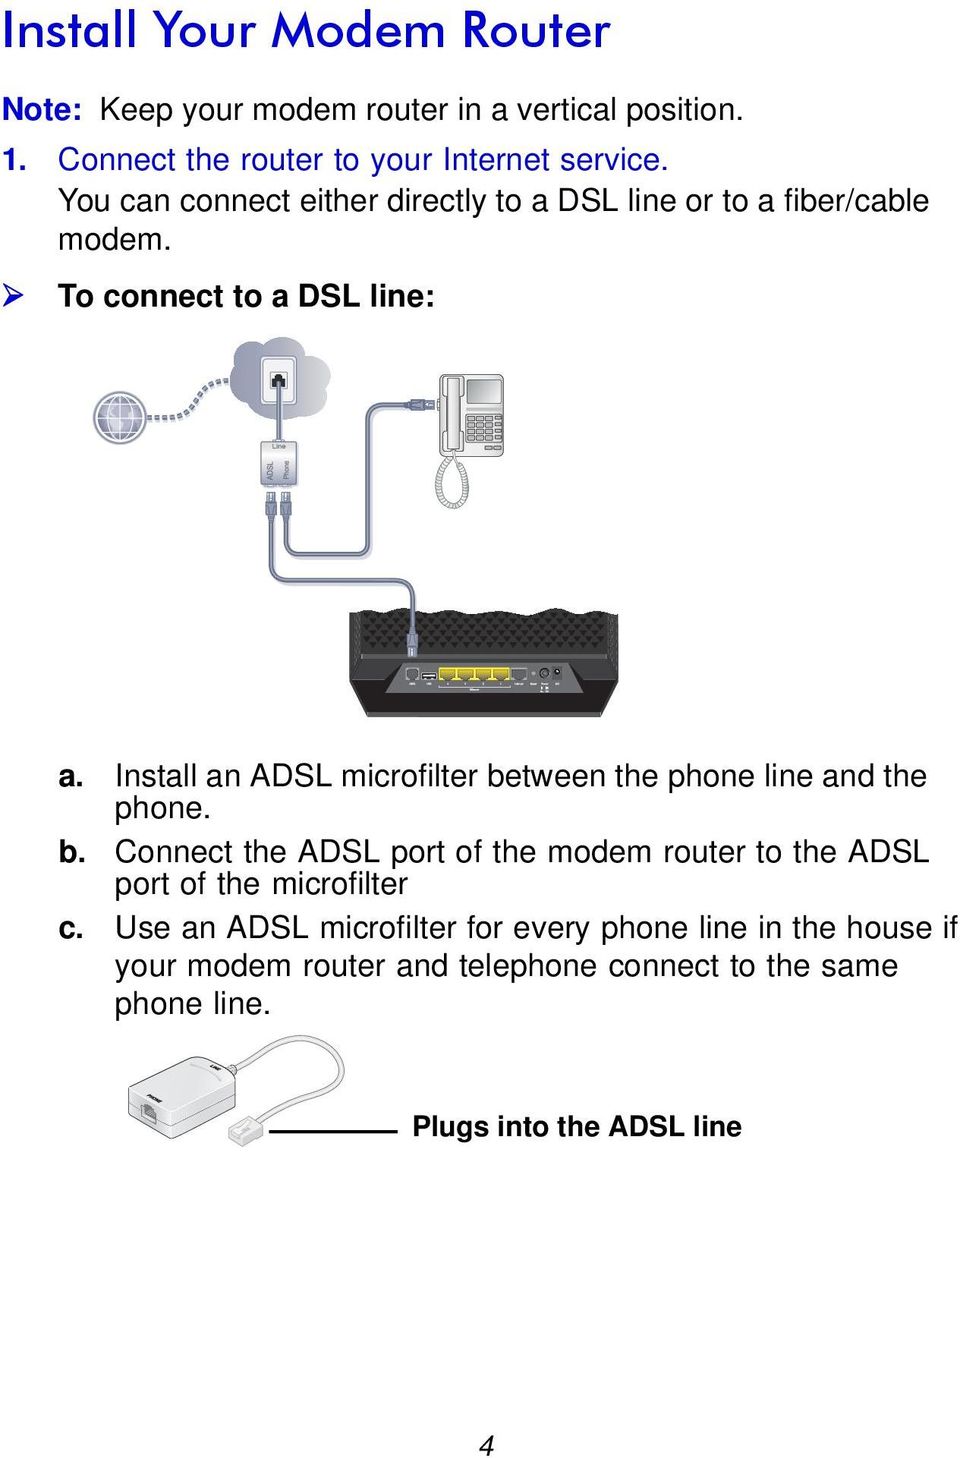 Install an ADSL microfilter between the phone line and the phone. b. Connect the ADSL port of the modem router to the ADSL port of the microfilter c.